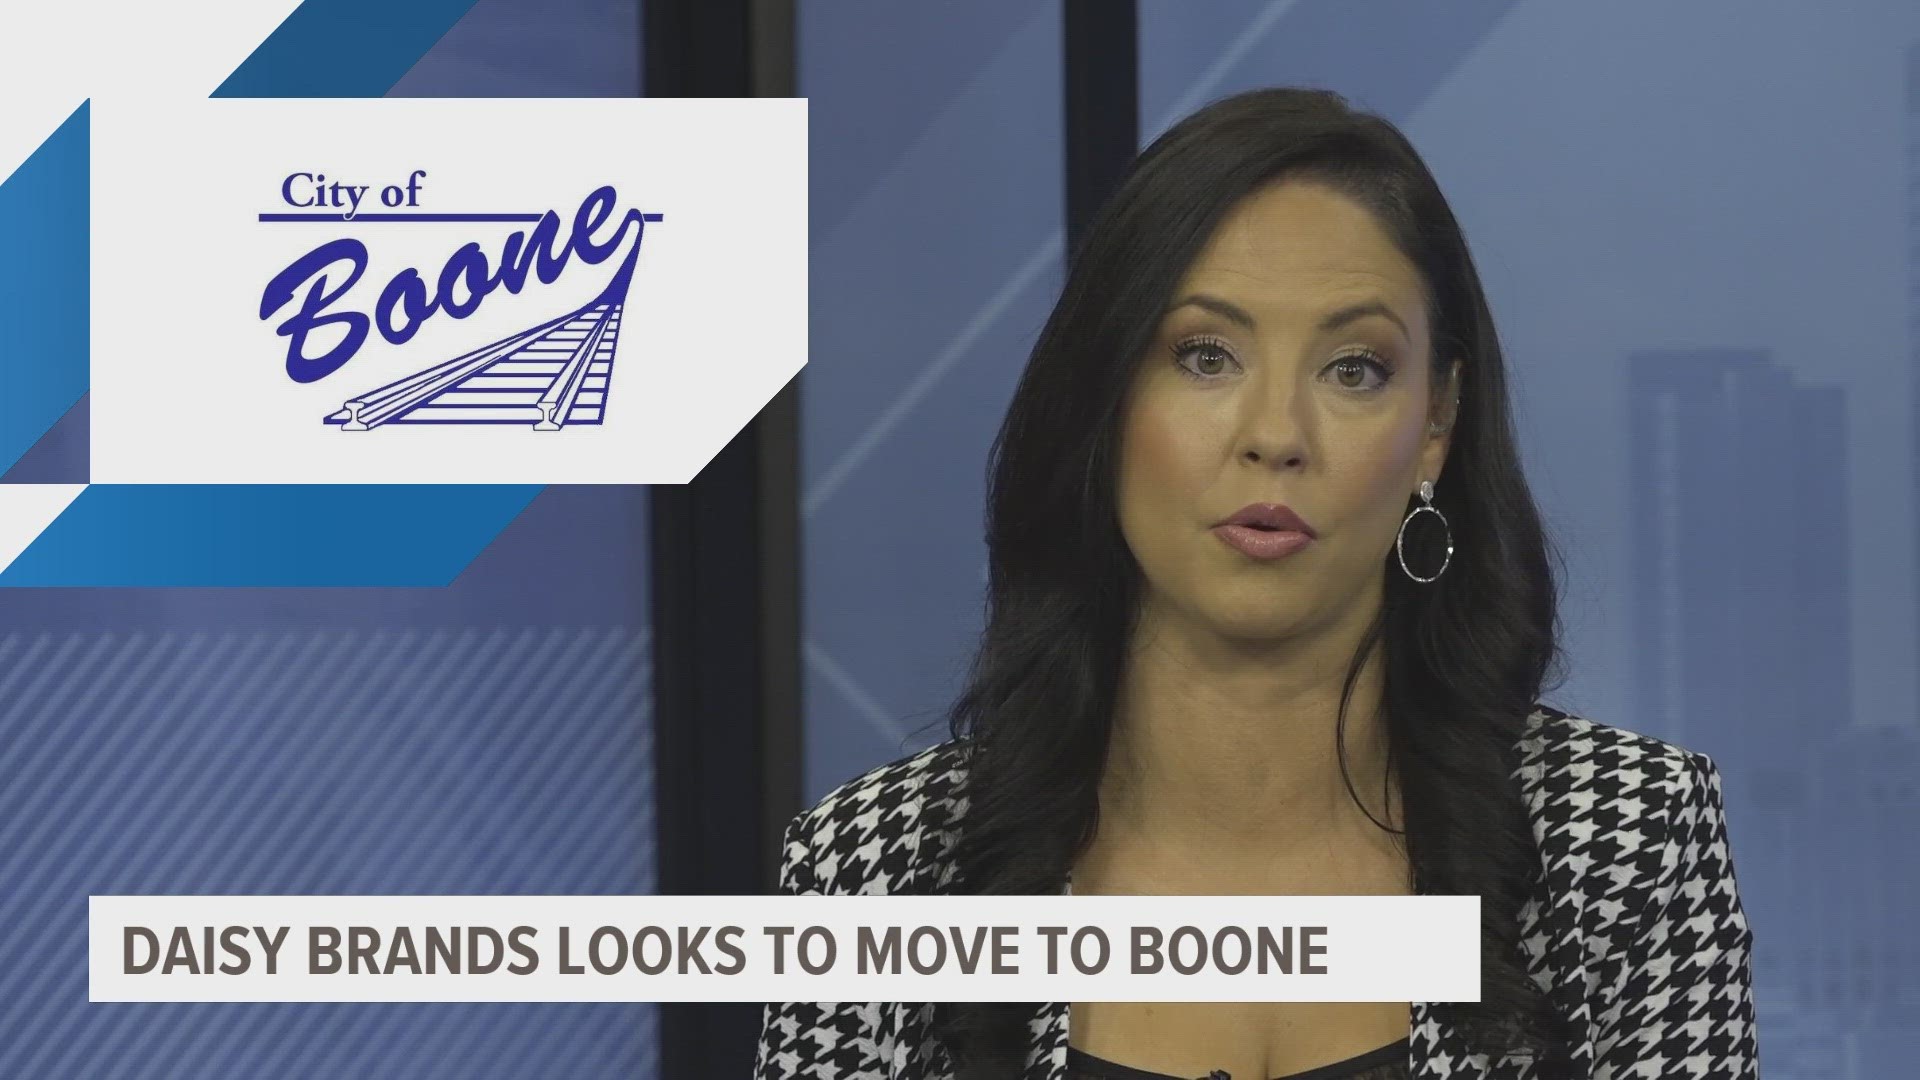 Daisy Brand plans to invest $708 million in the Boone community.